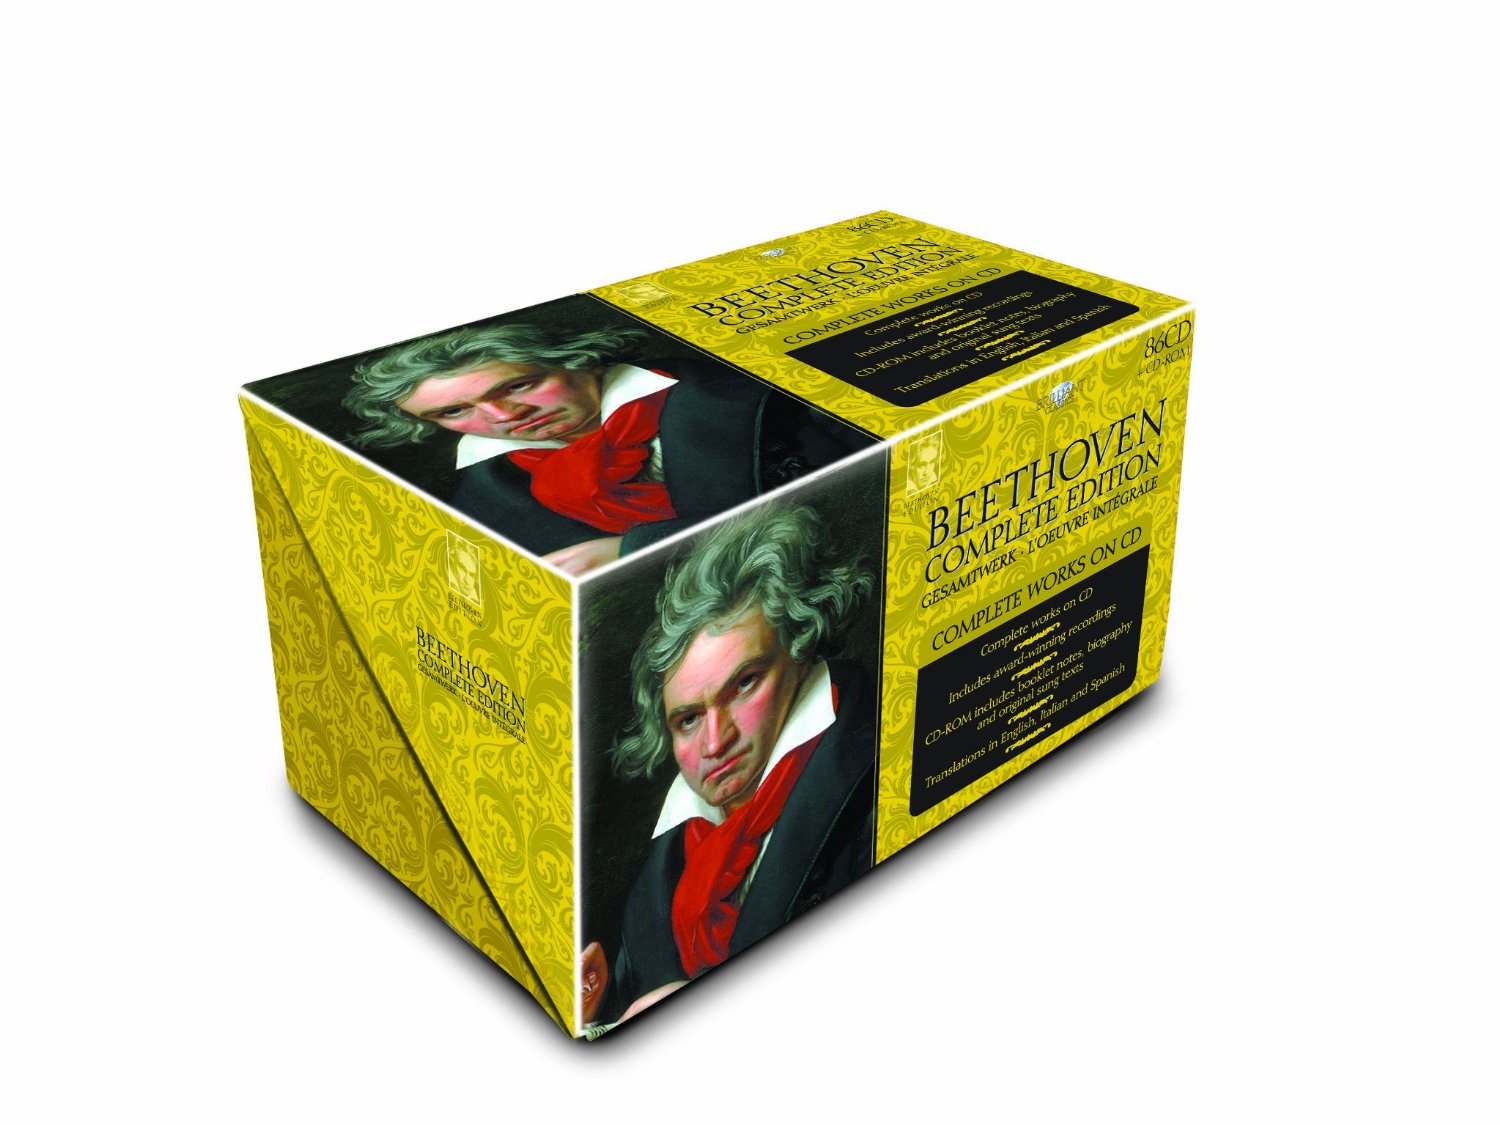 Beethoven complete edition dg